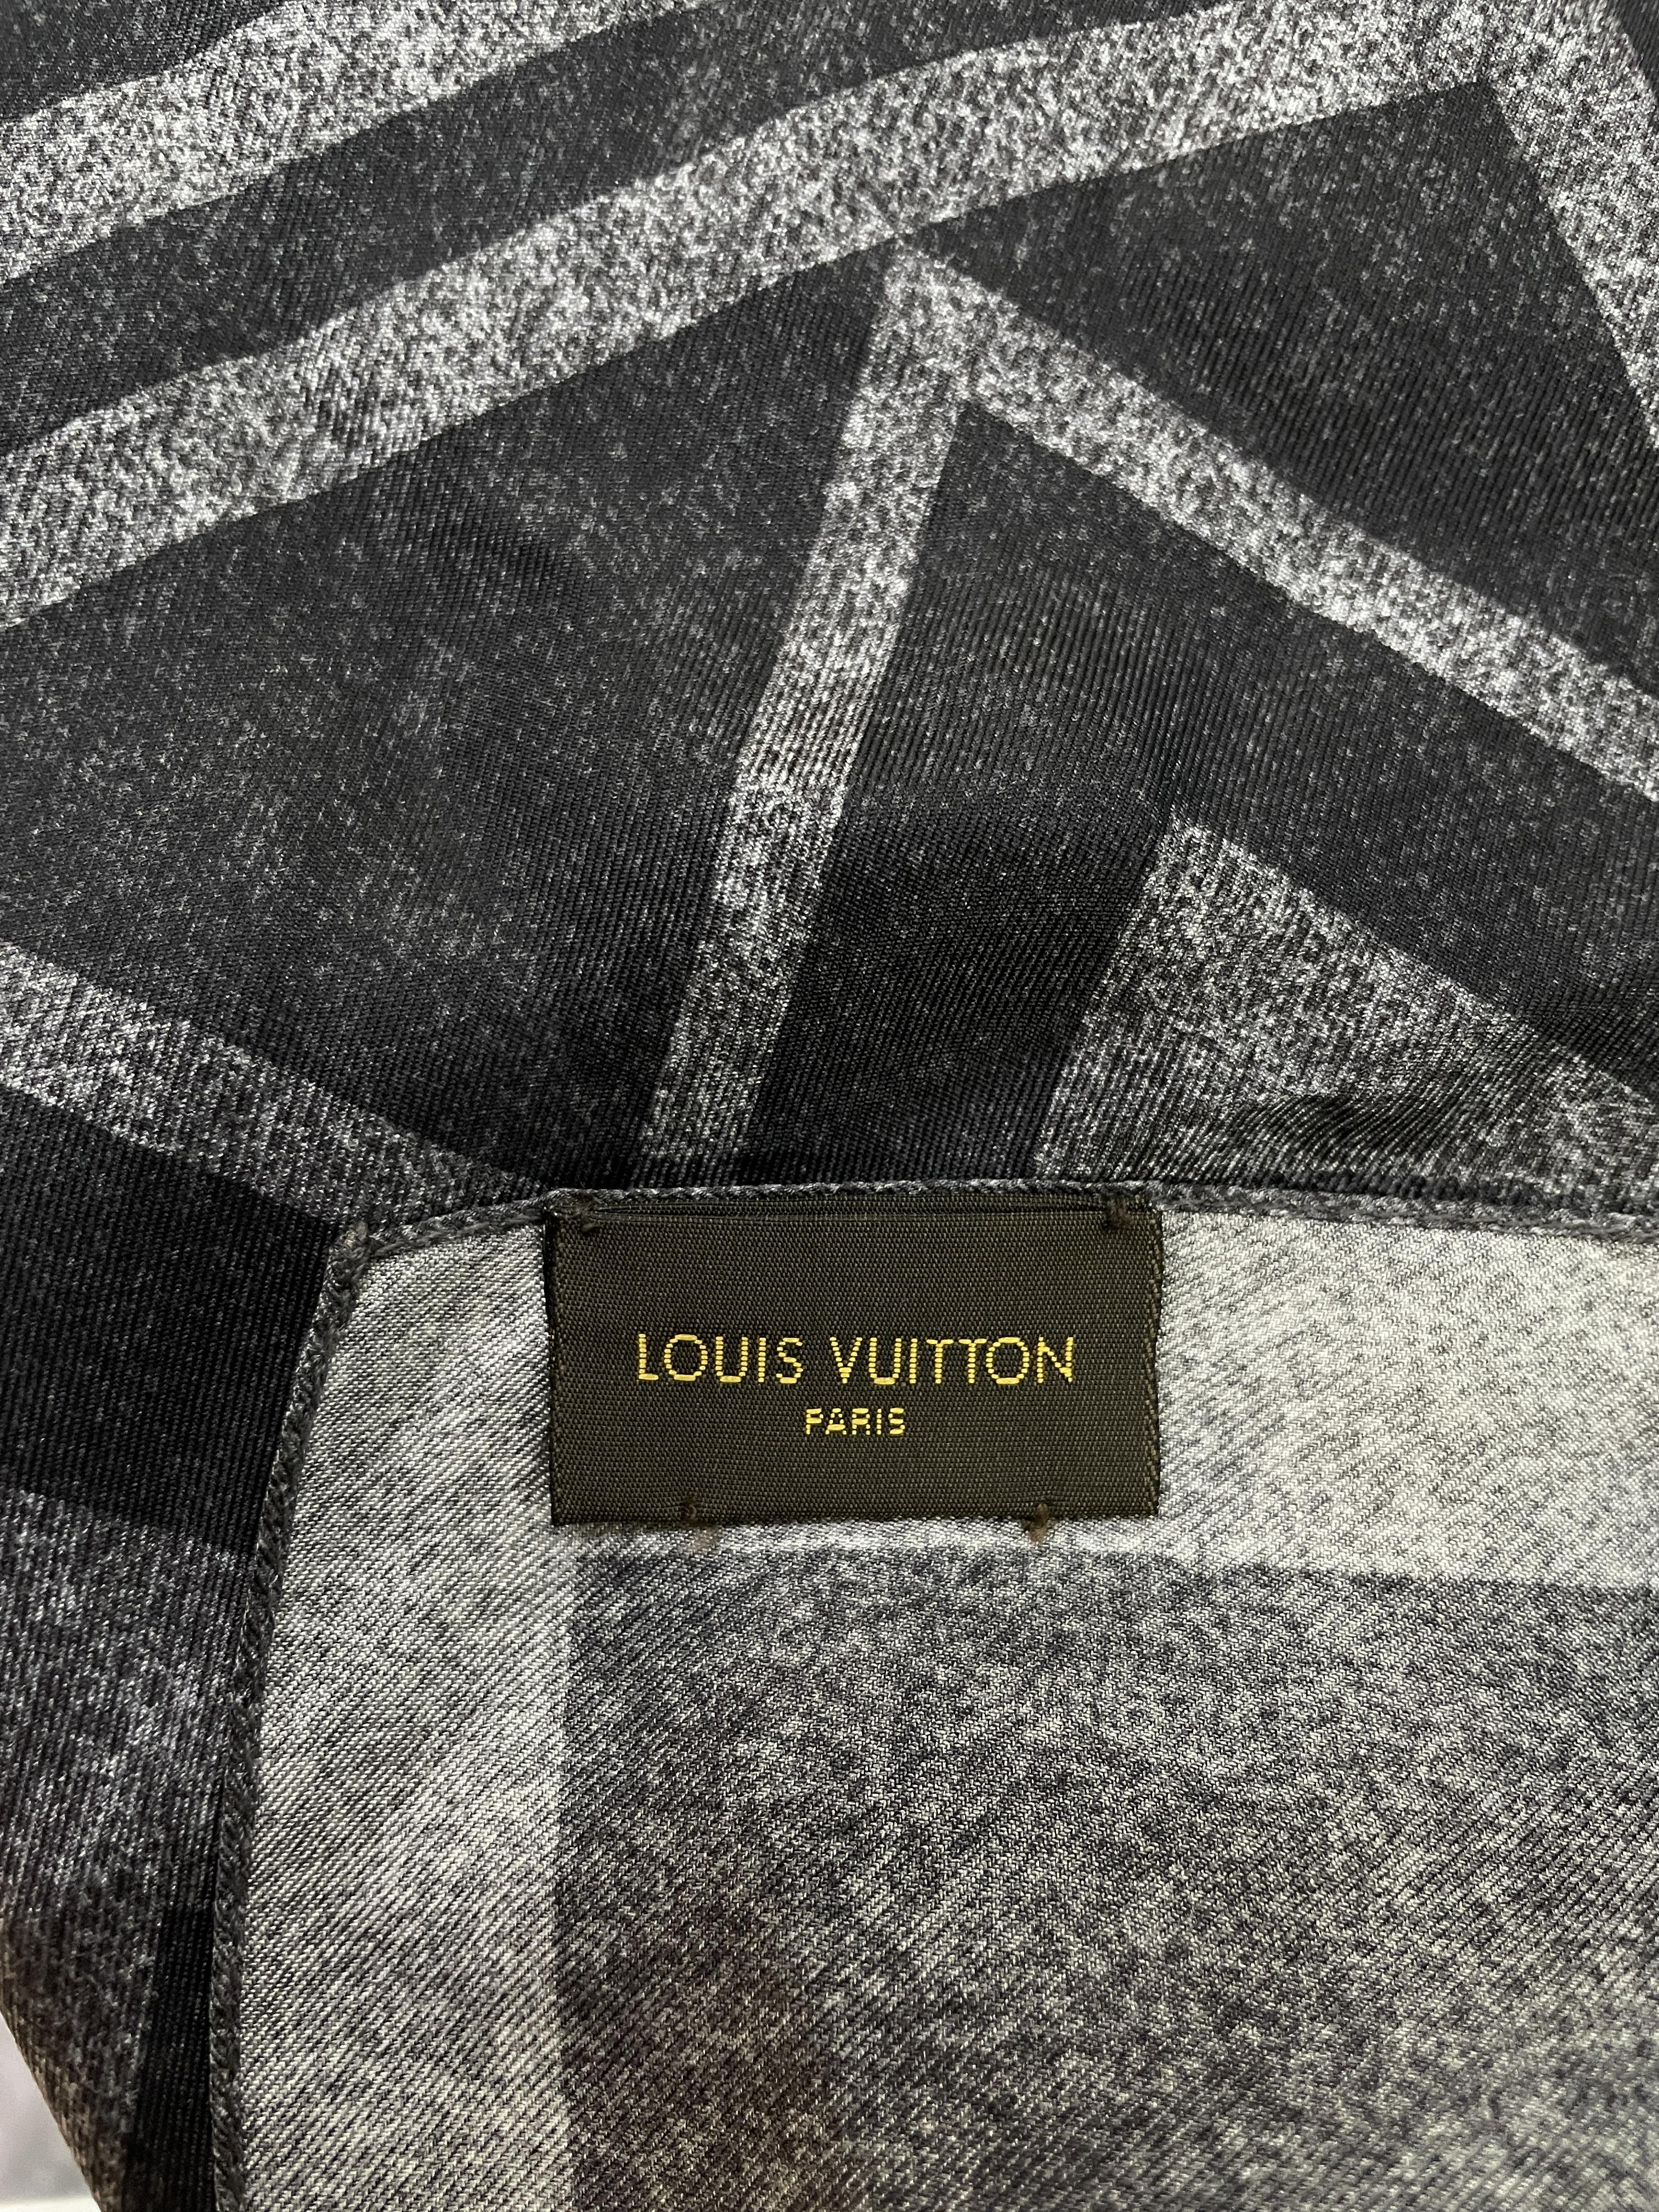 AN ASSORTMENT OF LOUIS VUITTON SCARVES - Image 11 of 14